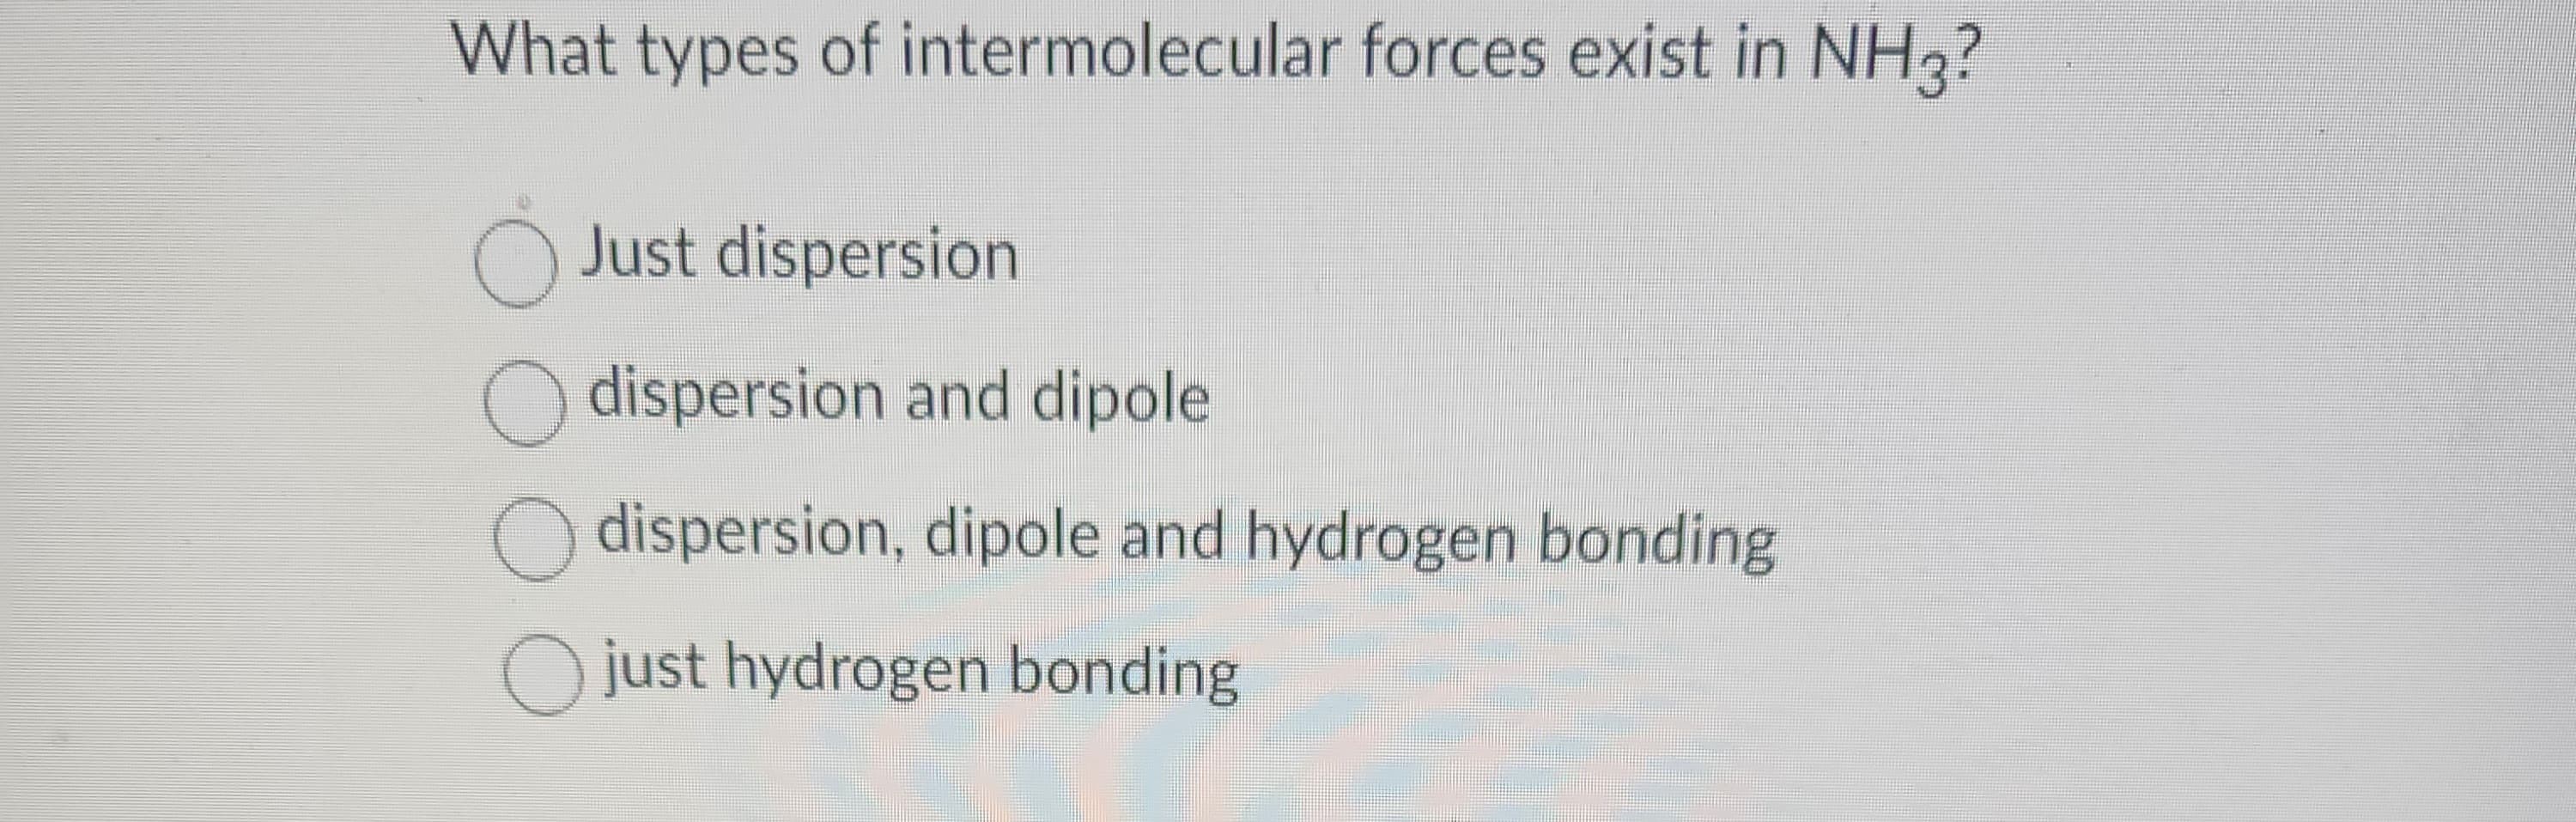 What types of intermolecular forces exist in NH3?
O Just dispersion
O dispersion and dipole
dispersion, dipole and hydrogen bonding
just hydrogen bonding